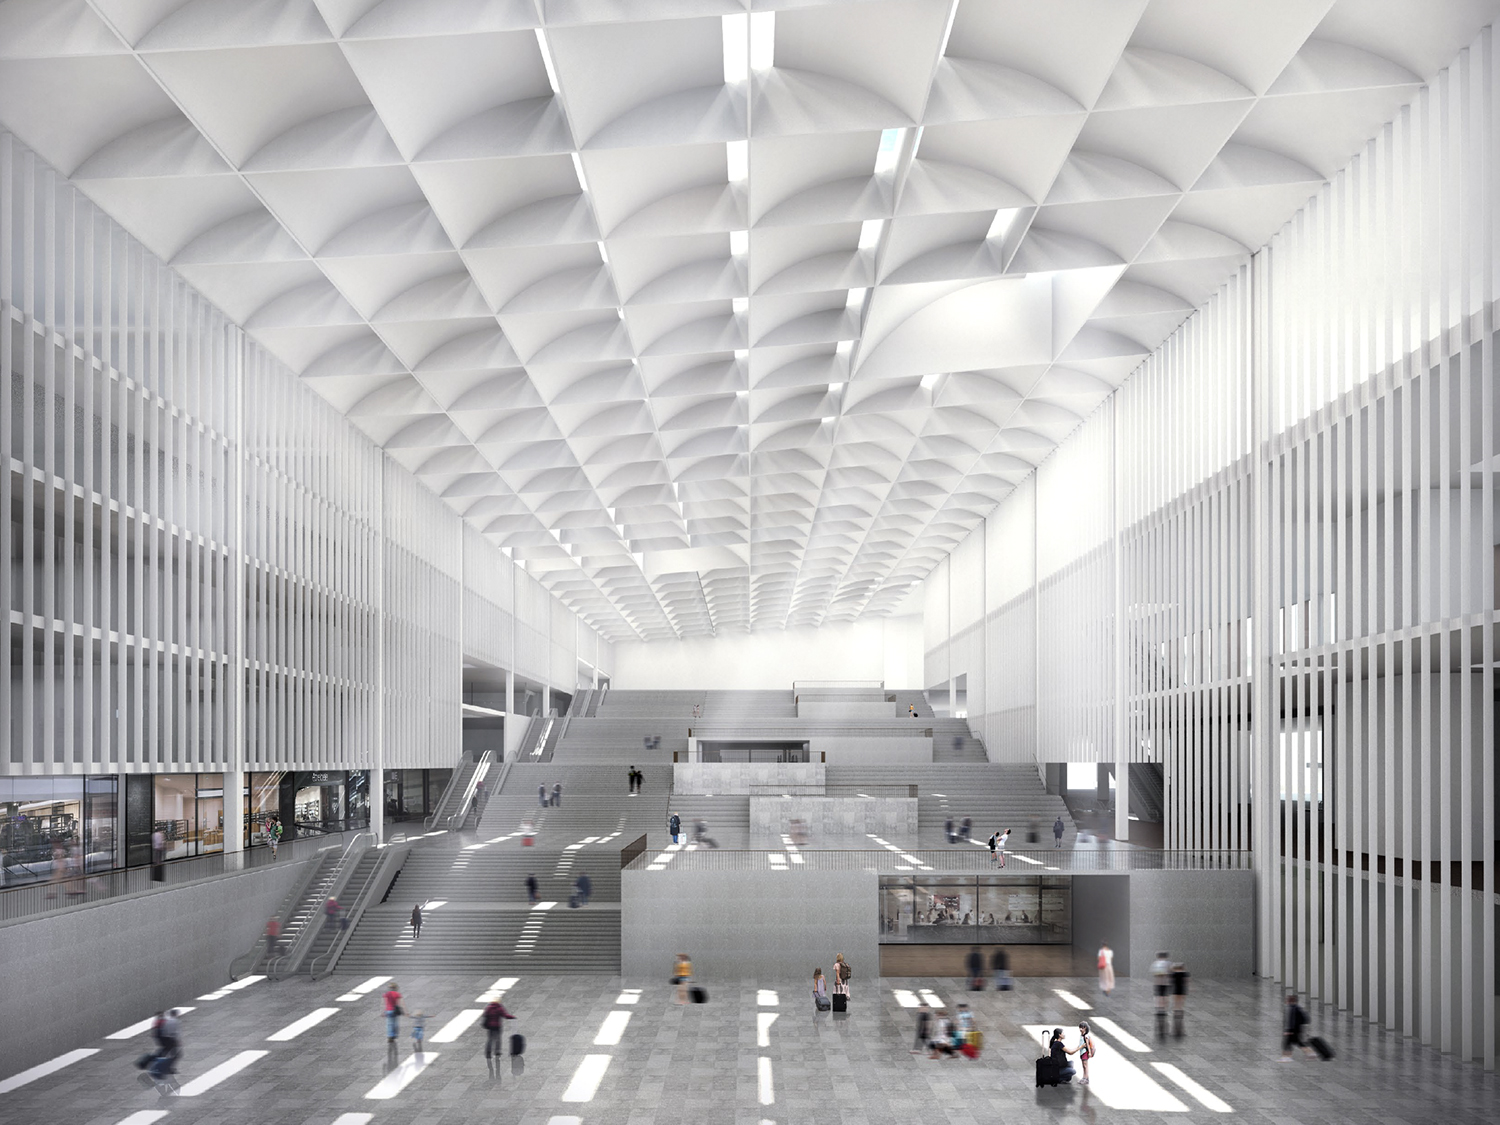 Meng Ye's rendering of a building titled Pearson Transit Hub